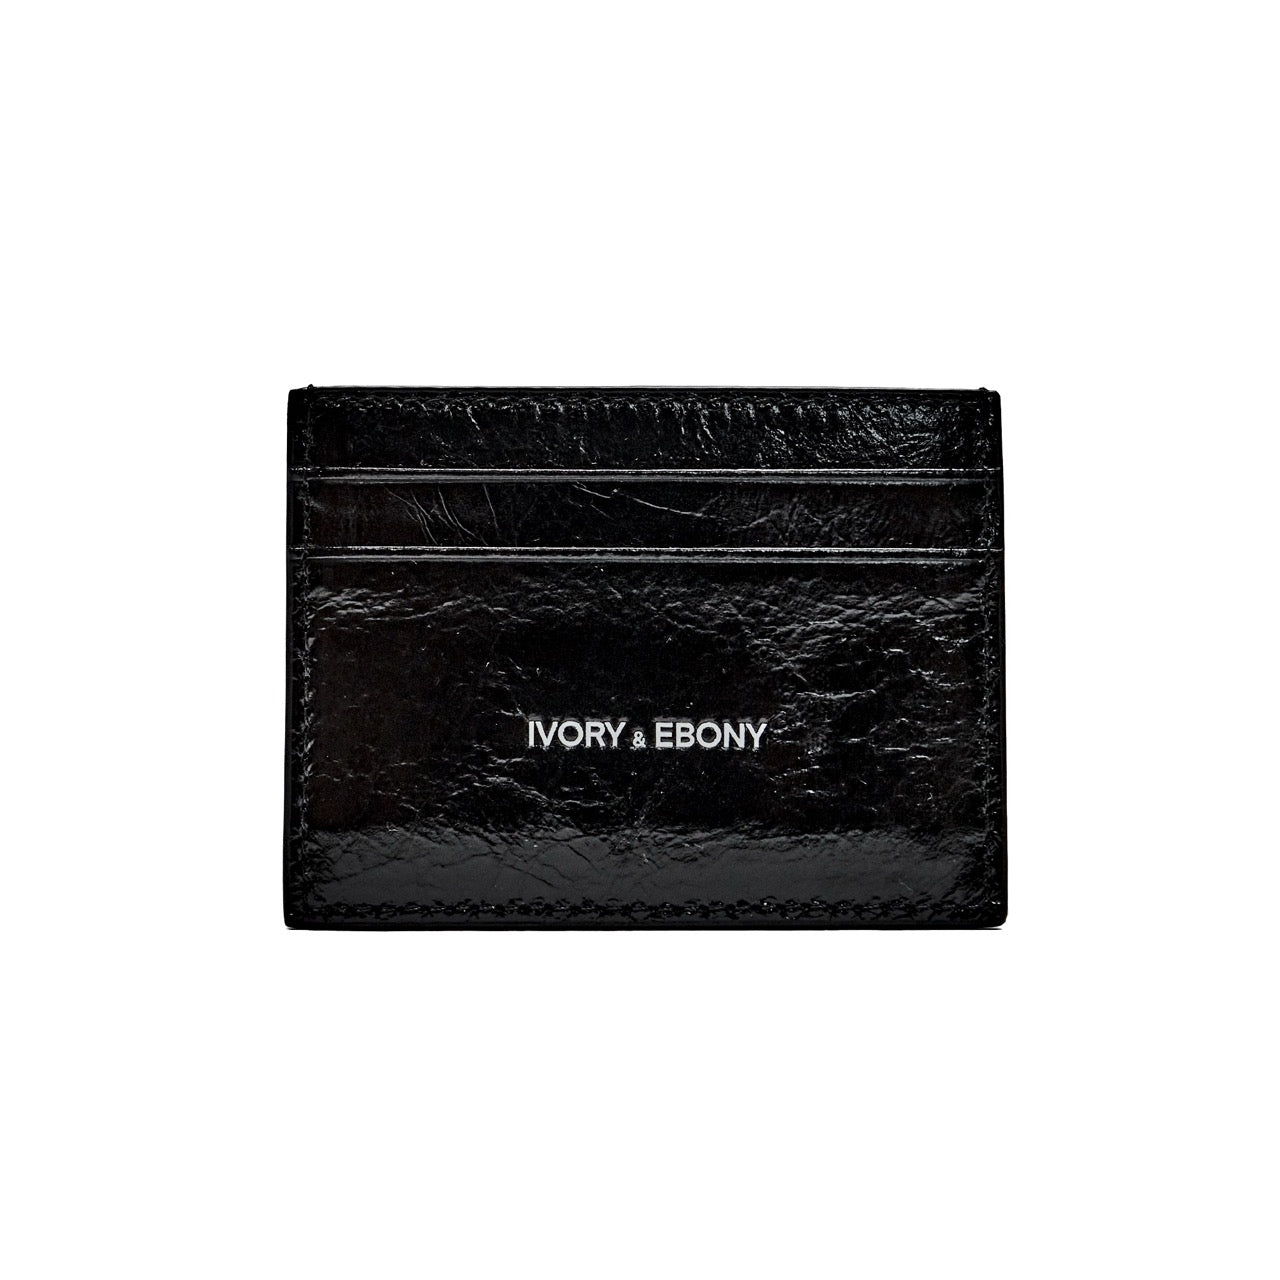 Classic in Black: Ivory & Ebony Wallet - 100% Genuine Leather, RFID Blocking - Redefine Your Everyday Carry with Effortless Style and Unmatched Protection.